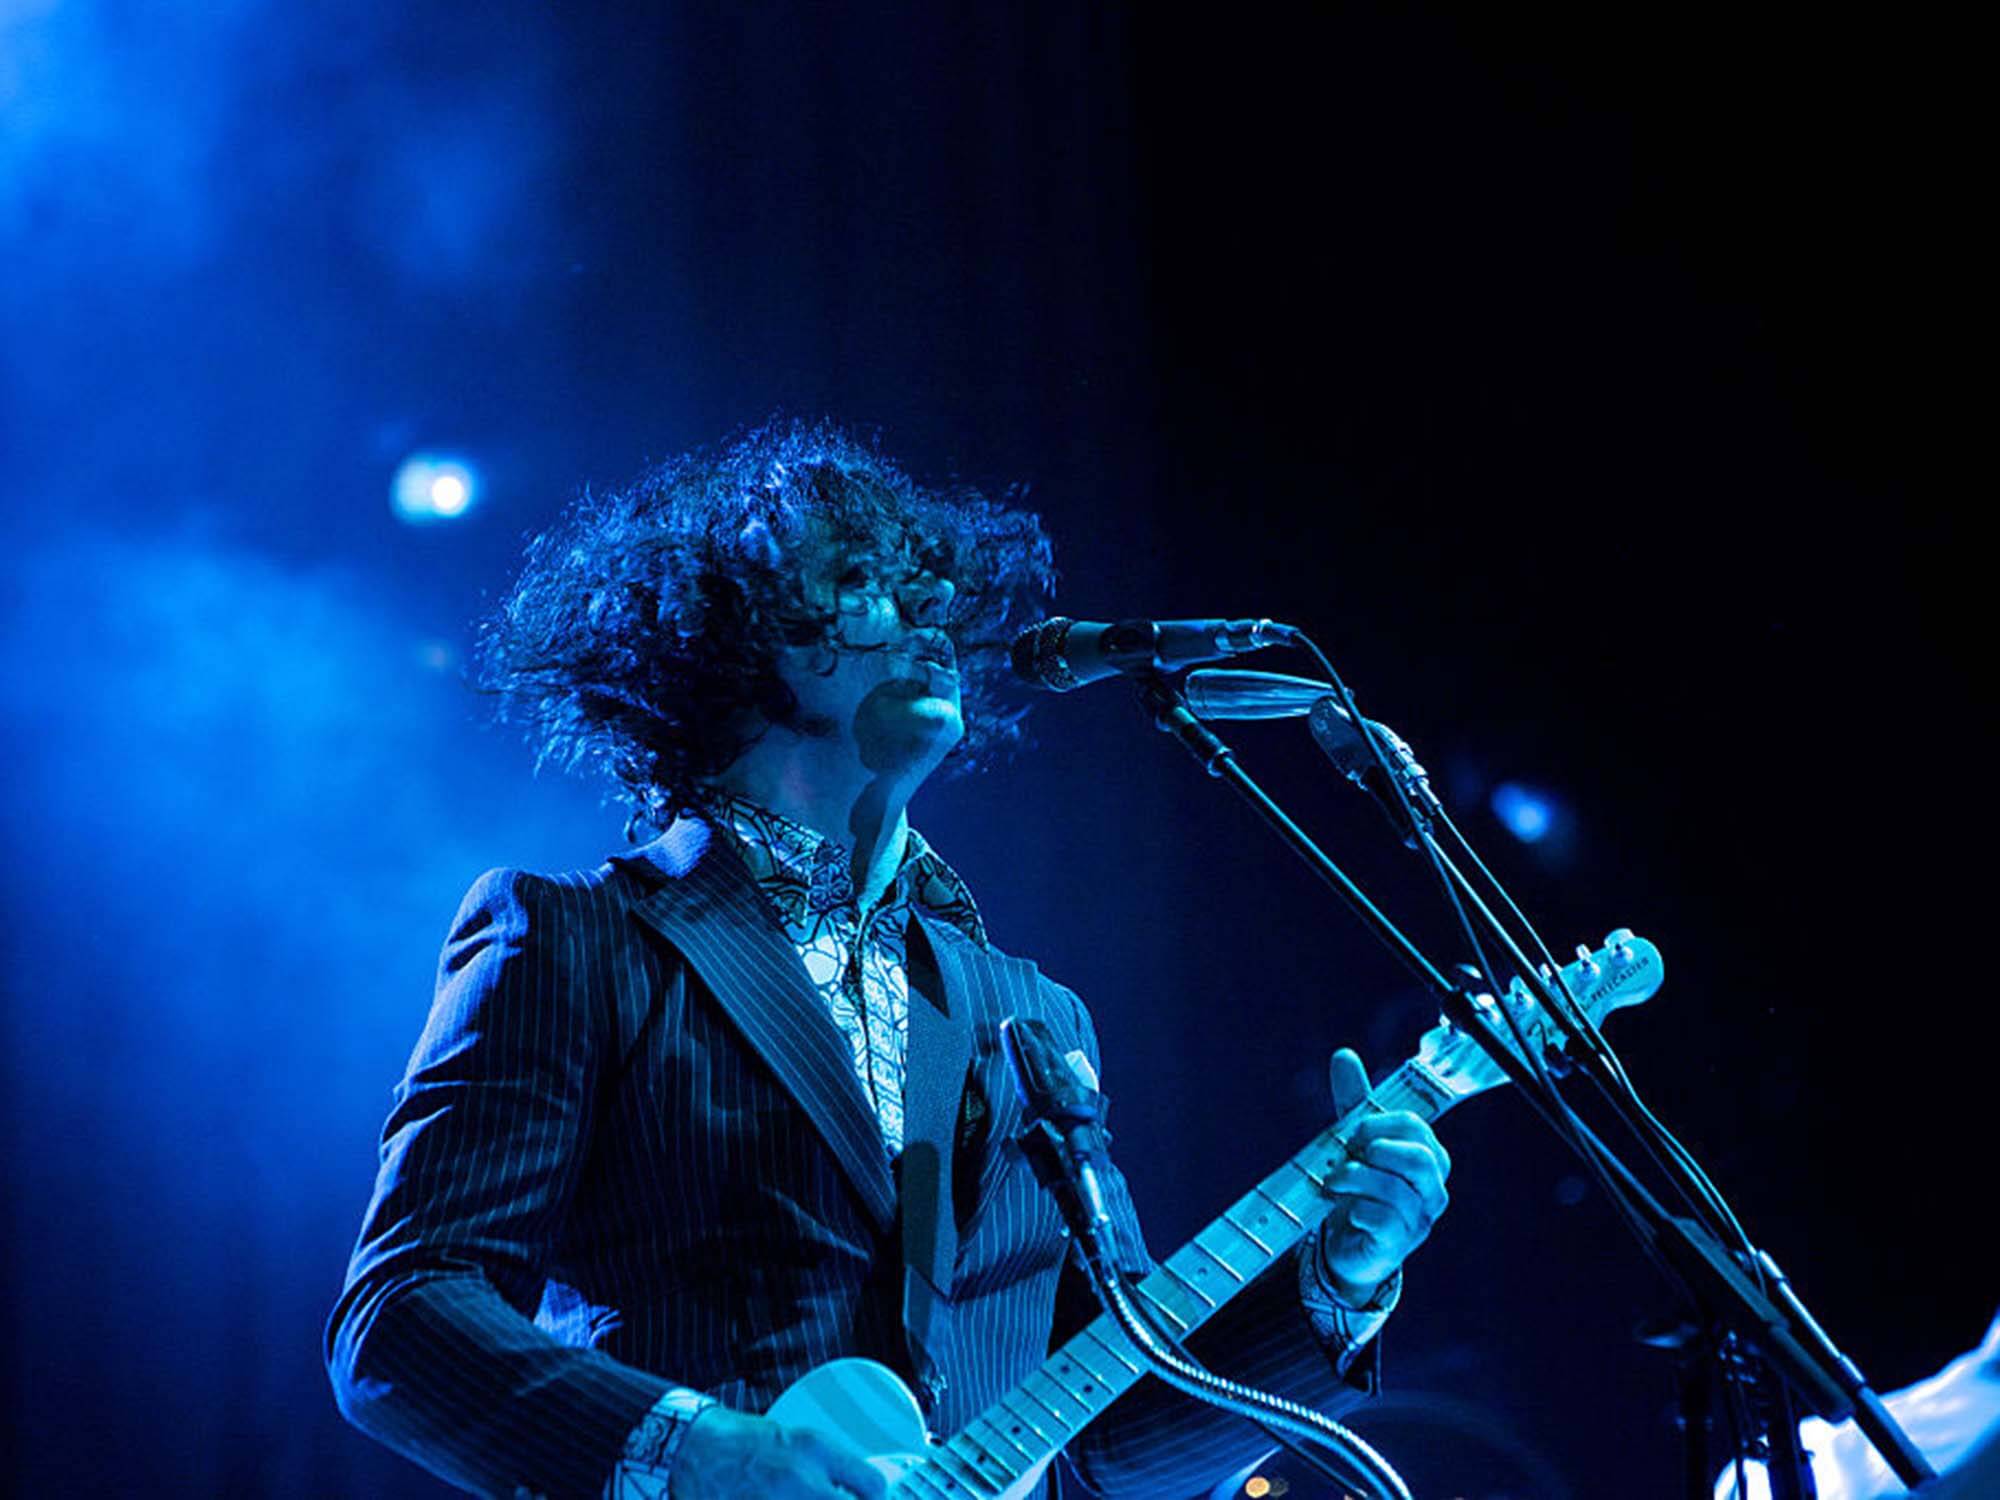 Jack White performing at the Bonnaroo Music Festival 2014